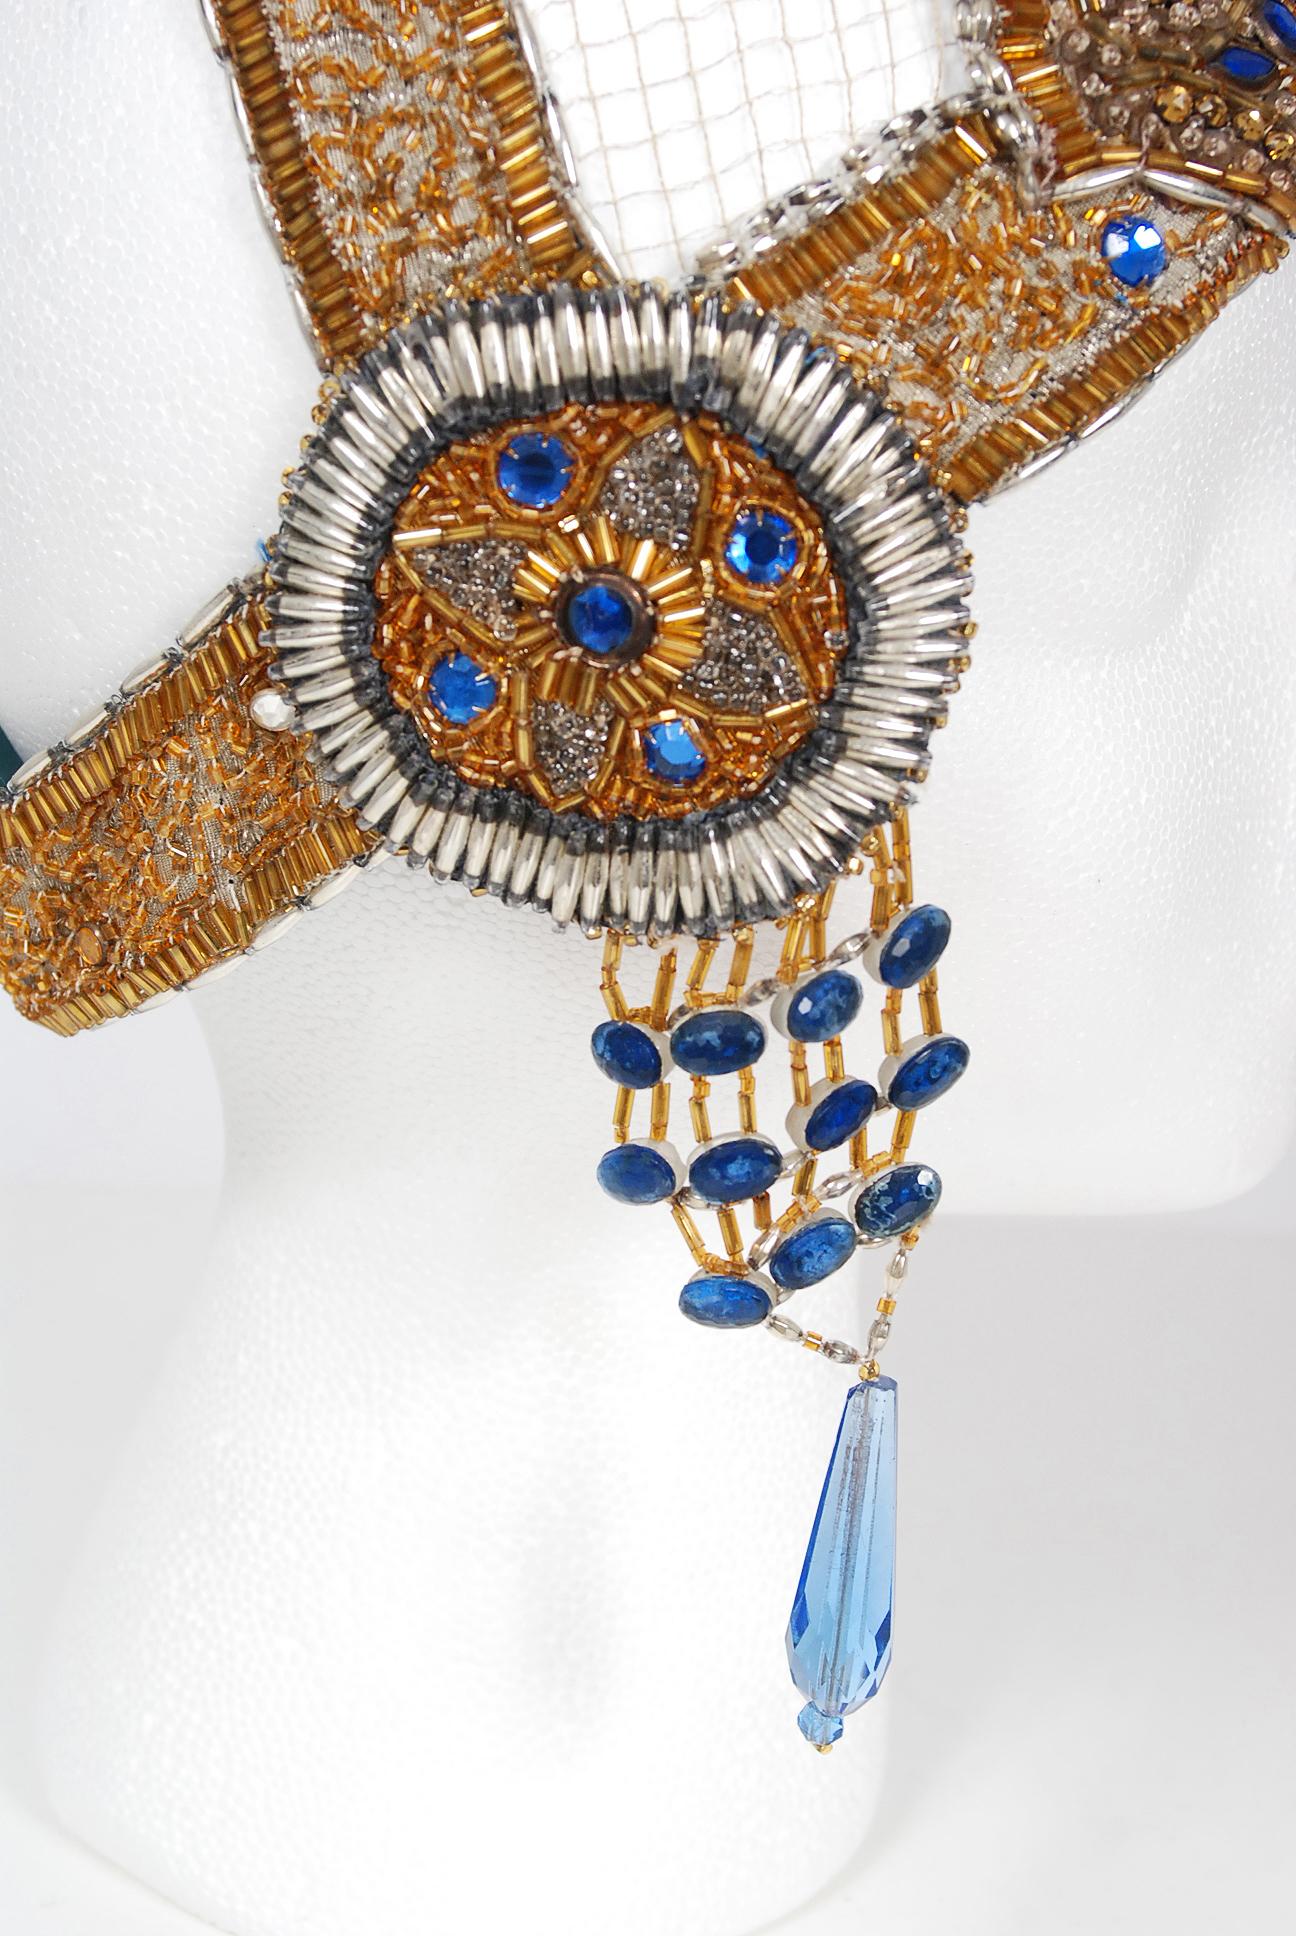 Women's Vintage 1920's French Couture Gold Beaded Blue Jeweled Flapper Crown Headpiece 